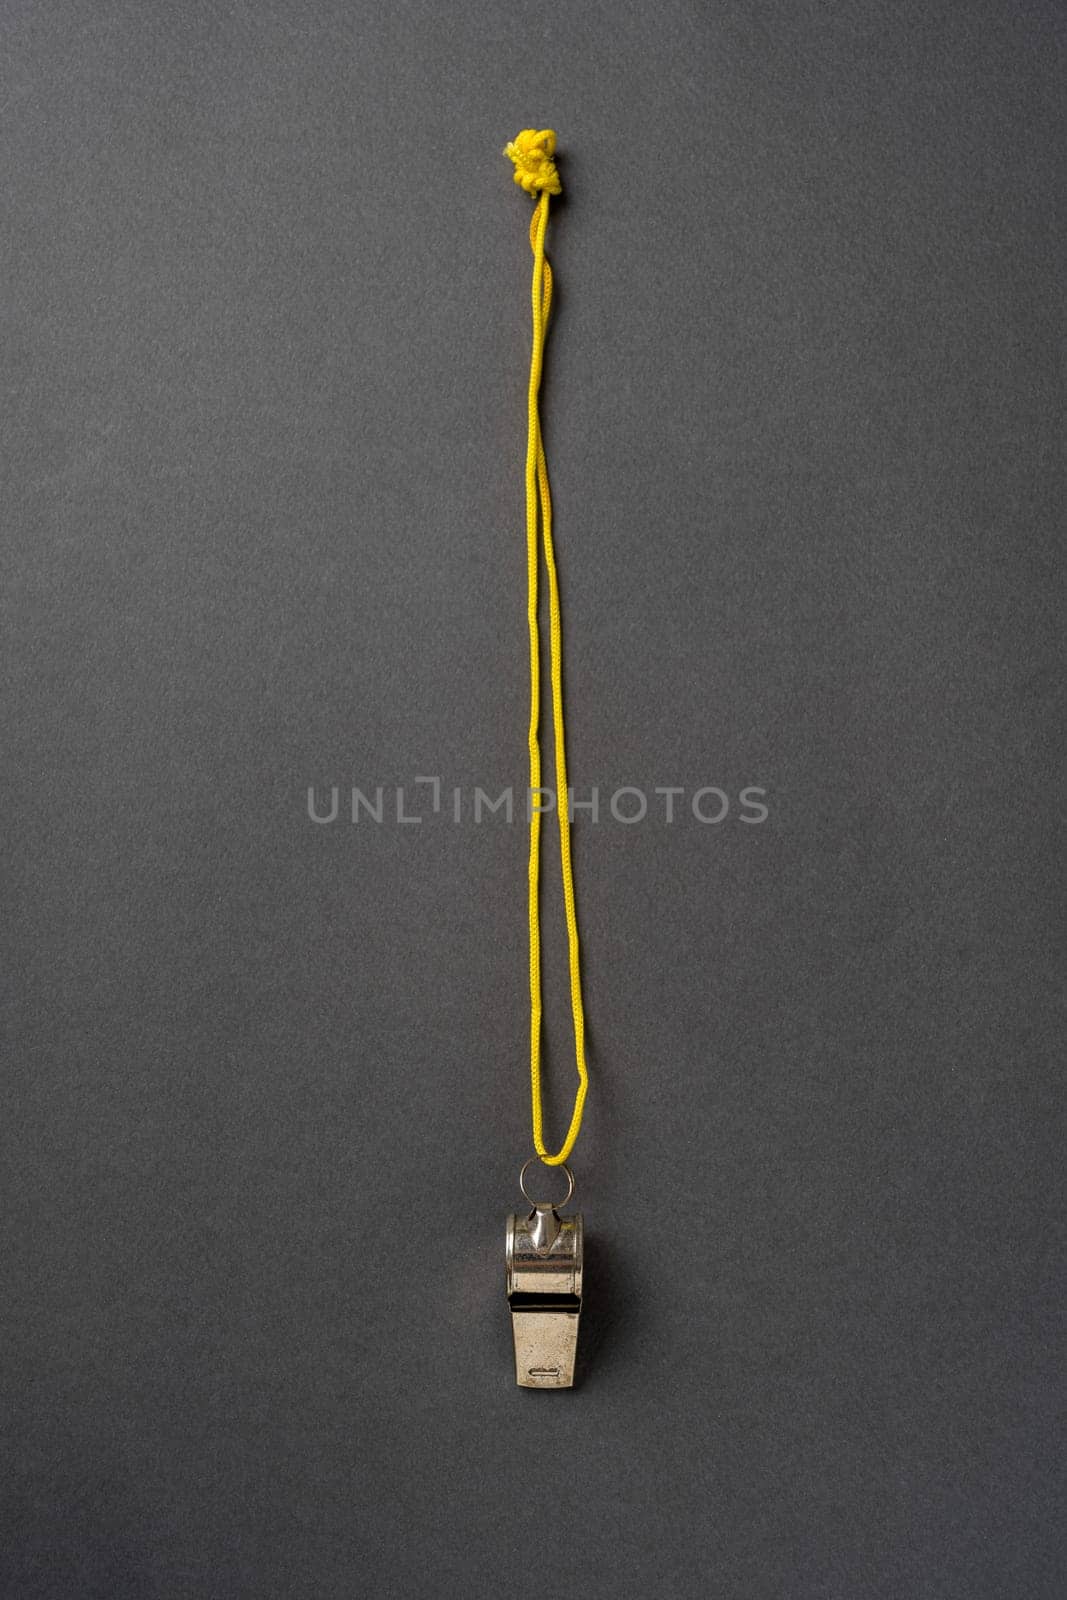 Top view of metal whistle with yellow string on dark gray background by Sonat